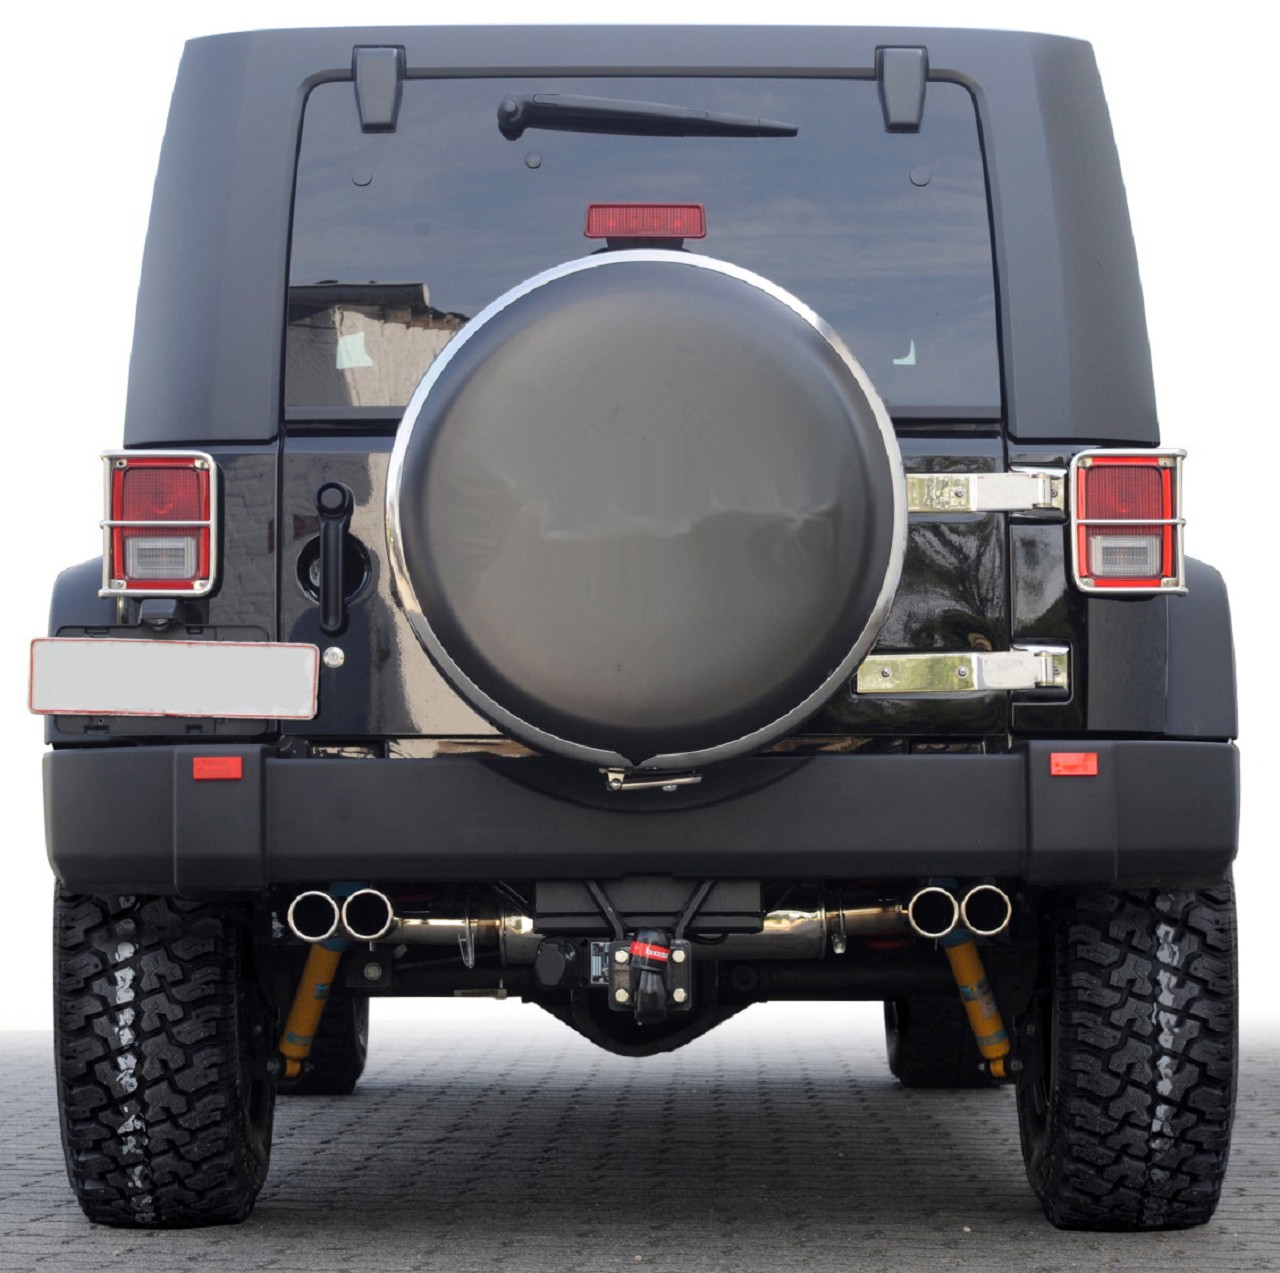 Tyre cover suitable for Jeep Wrangler JK standard tyres 255/75R17 and 255/ 70R18